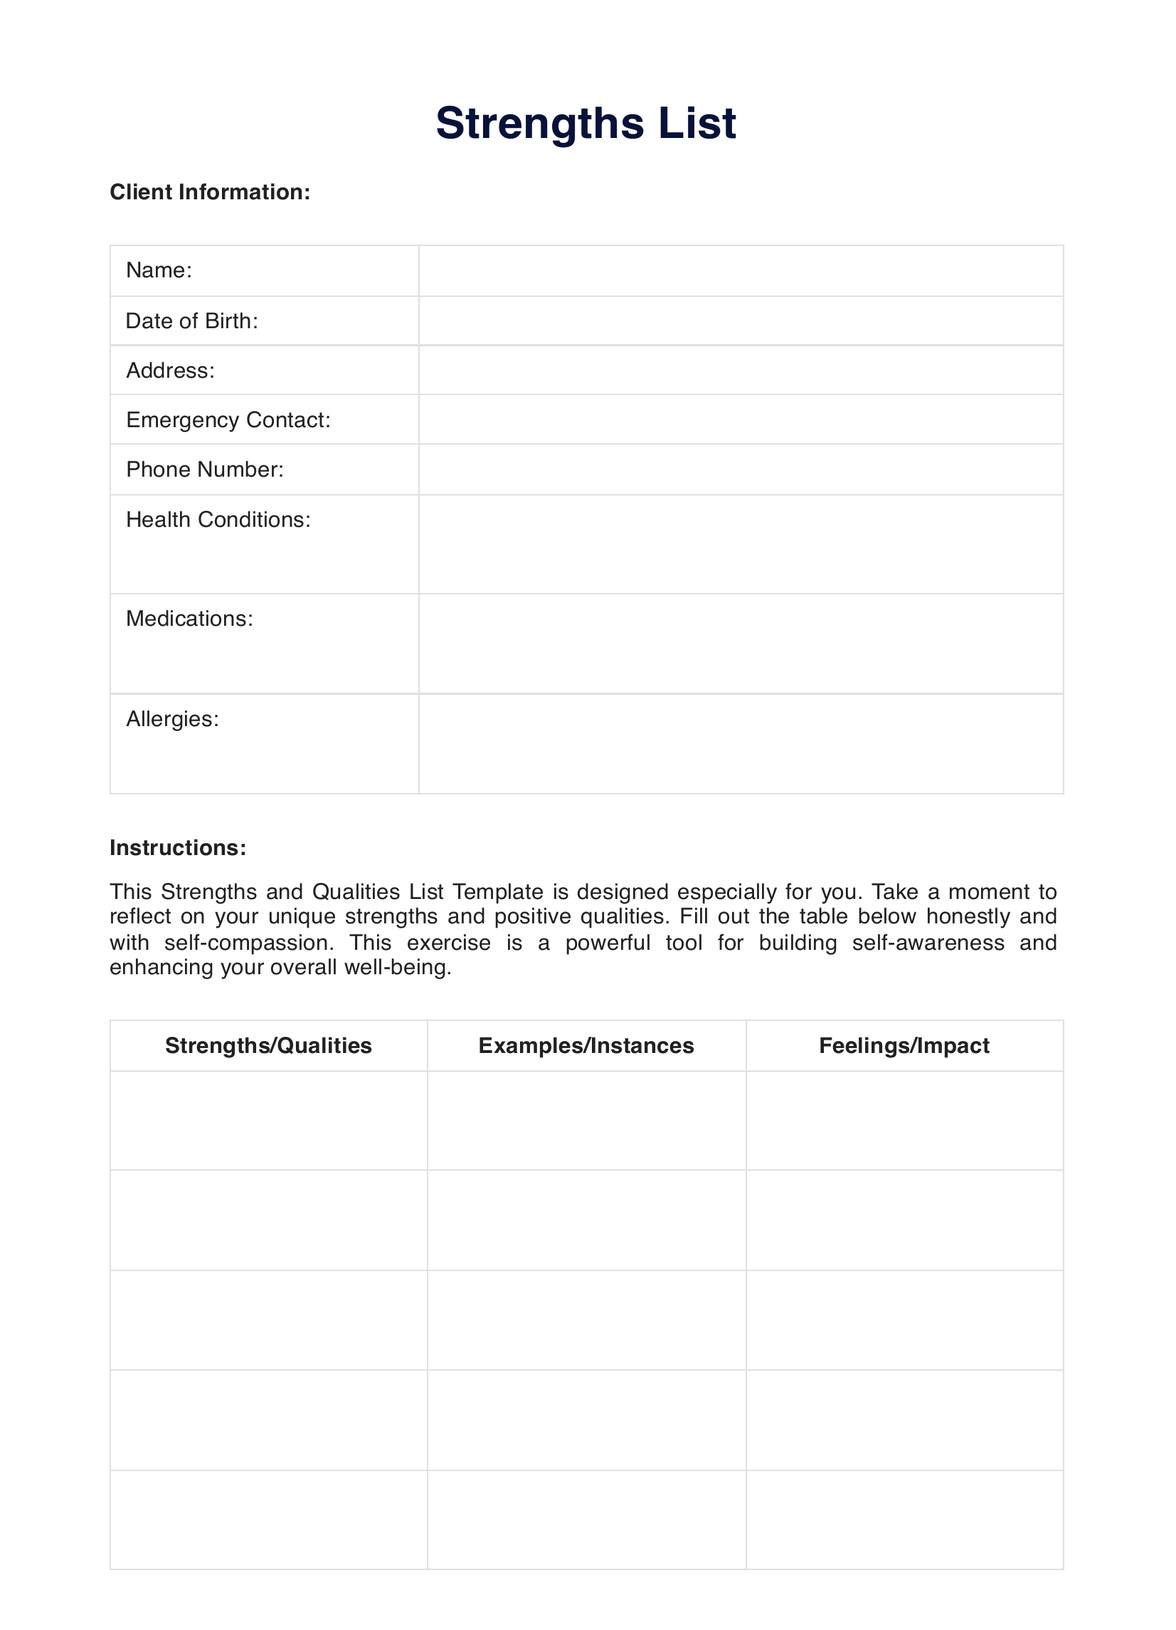 My Strengths and Qualities PDF Example